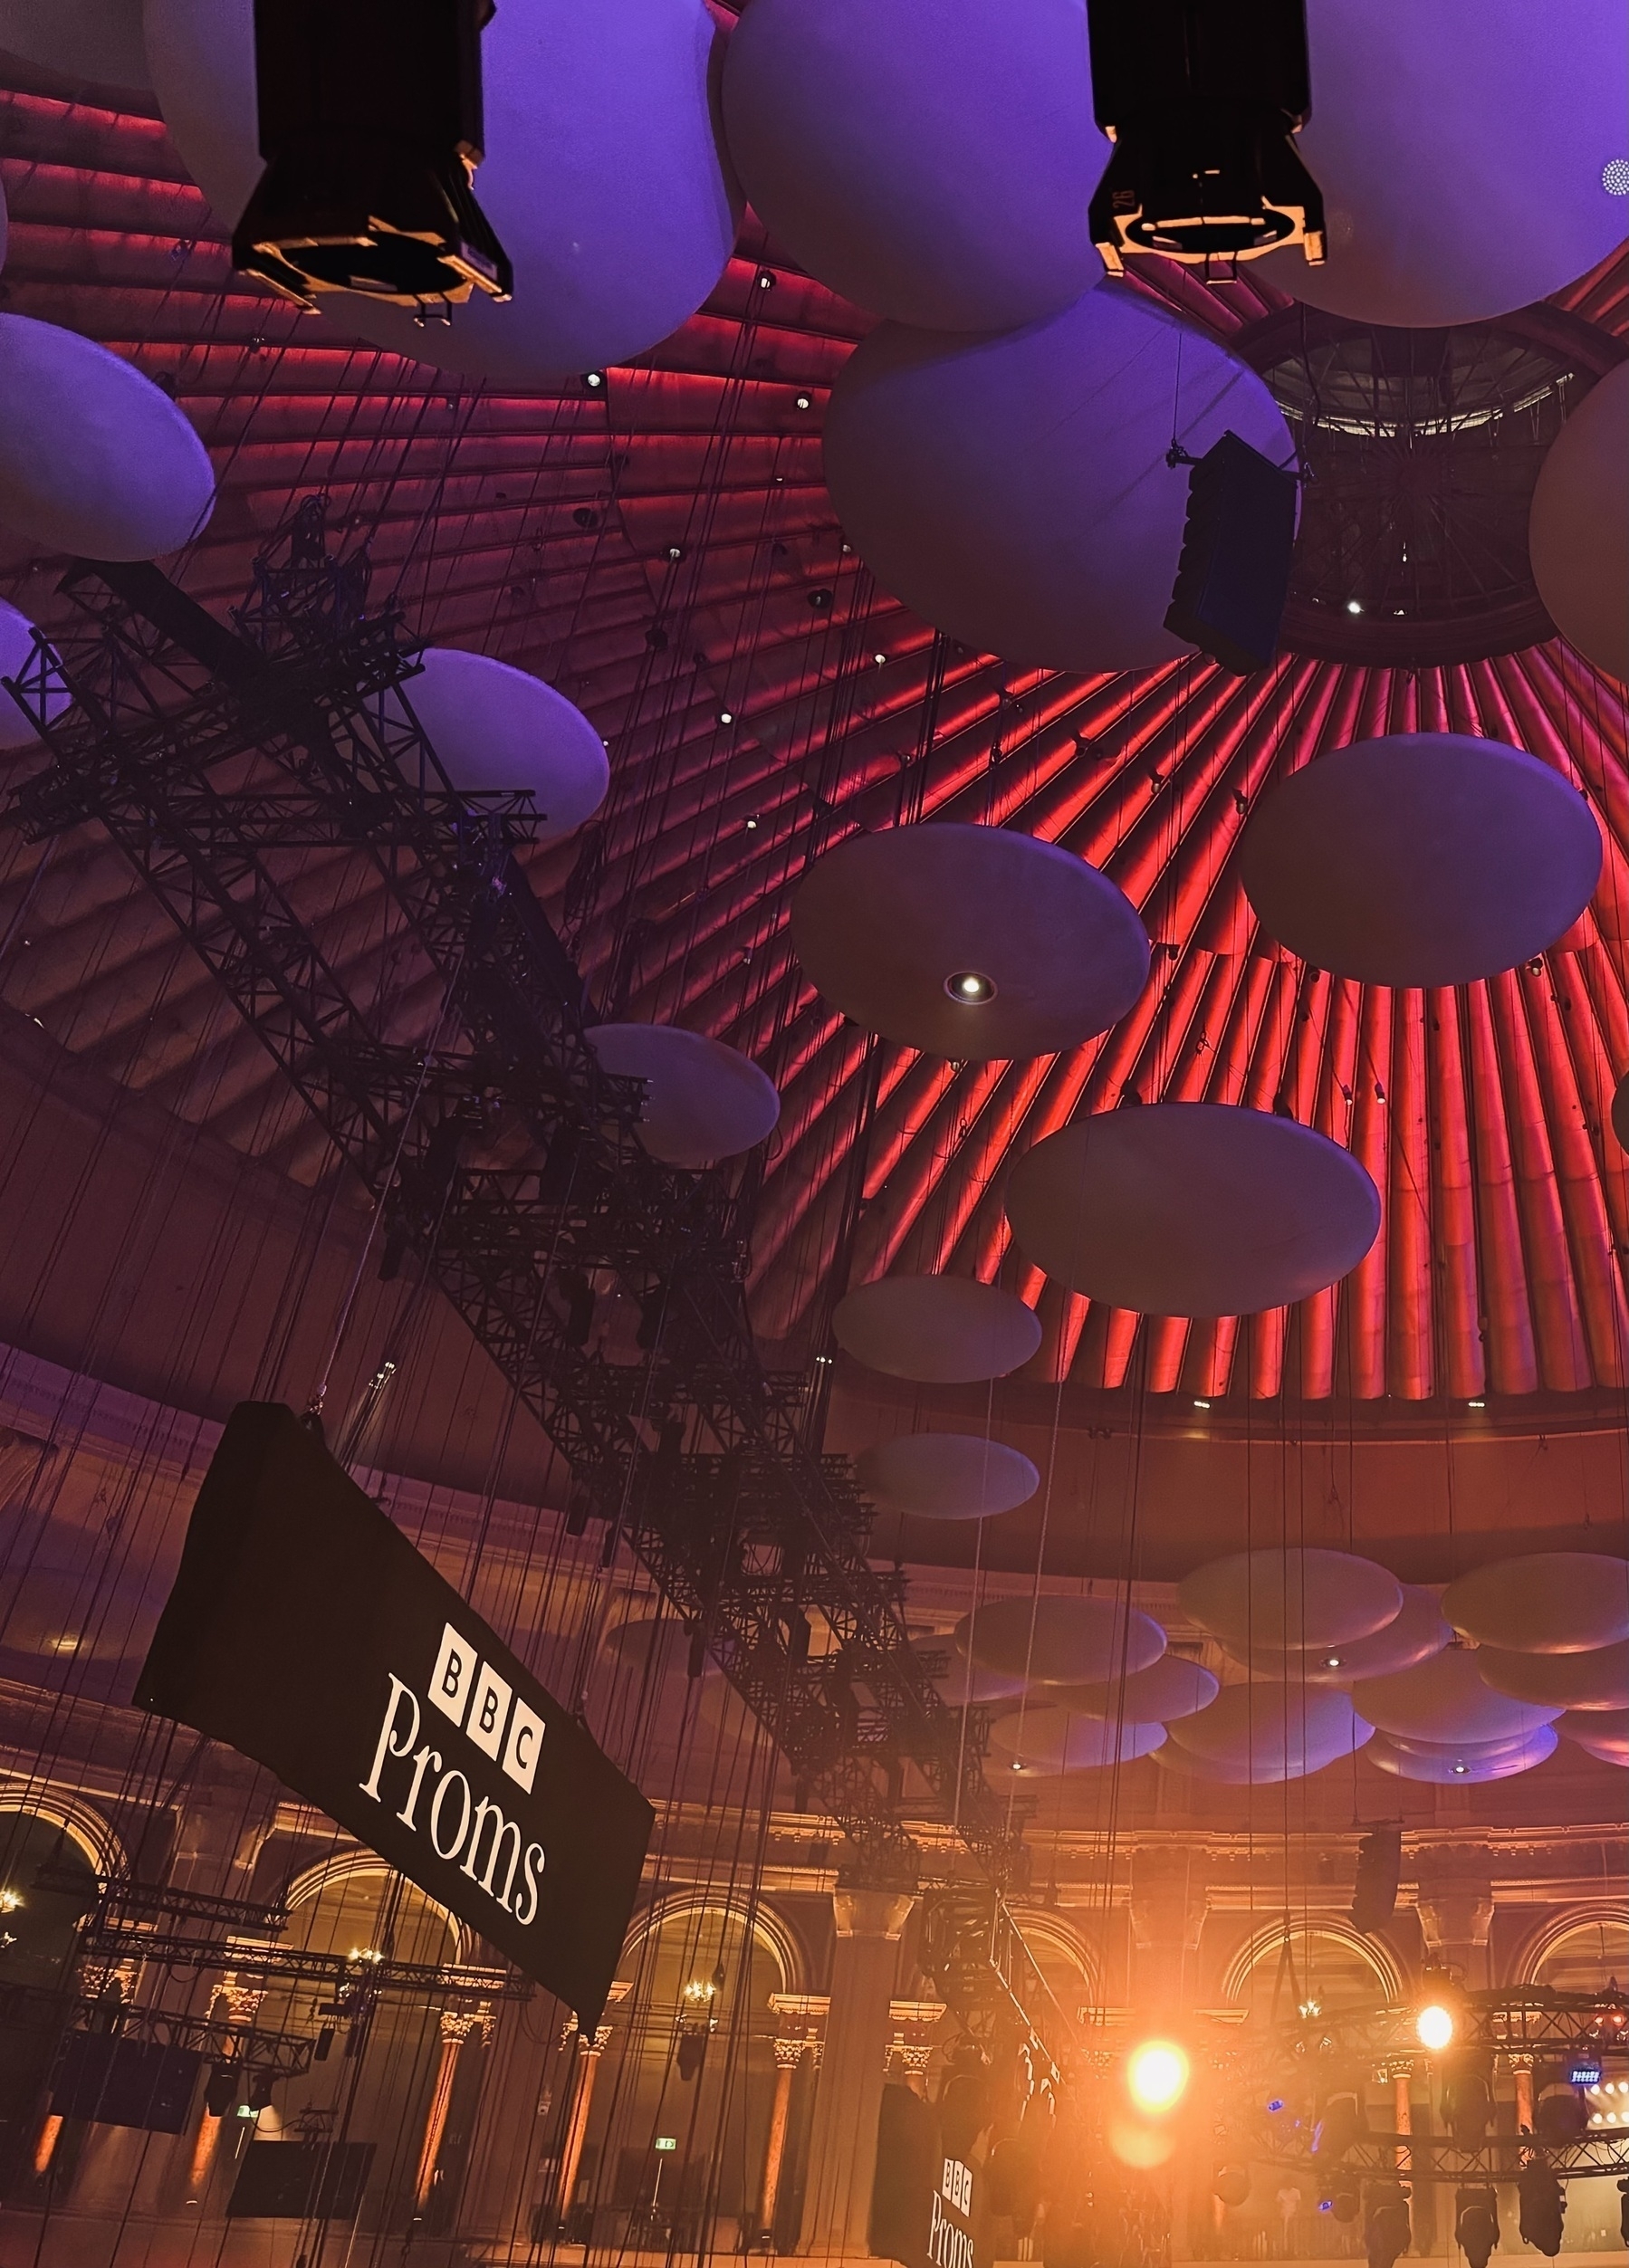 The ceiling of the Royal Albert Hall with a BBC Proms banner hanging from it.